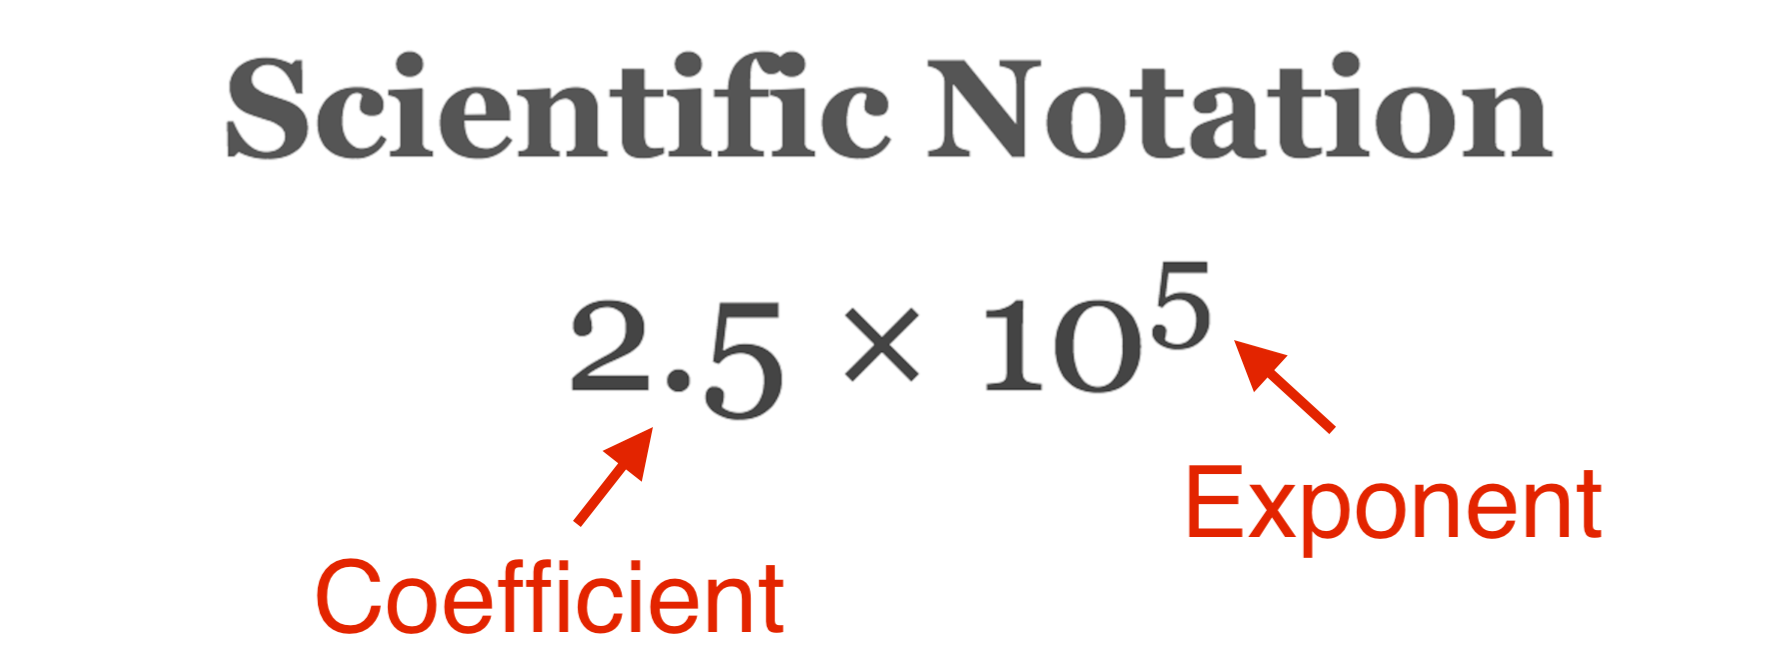 scientific notation formula with callouts on the coefficient and exponent